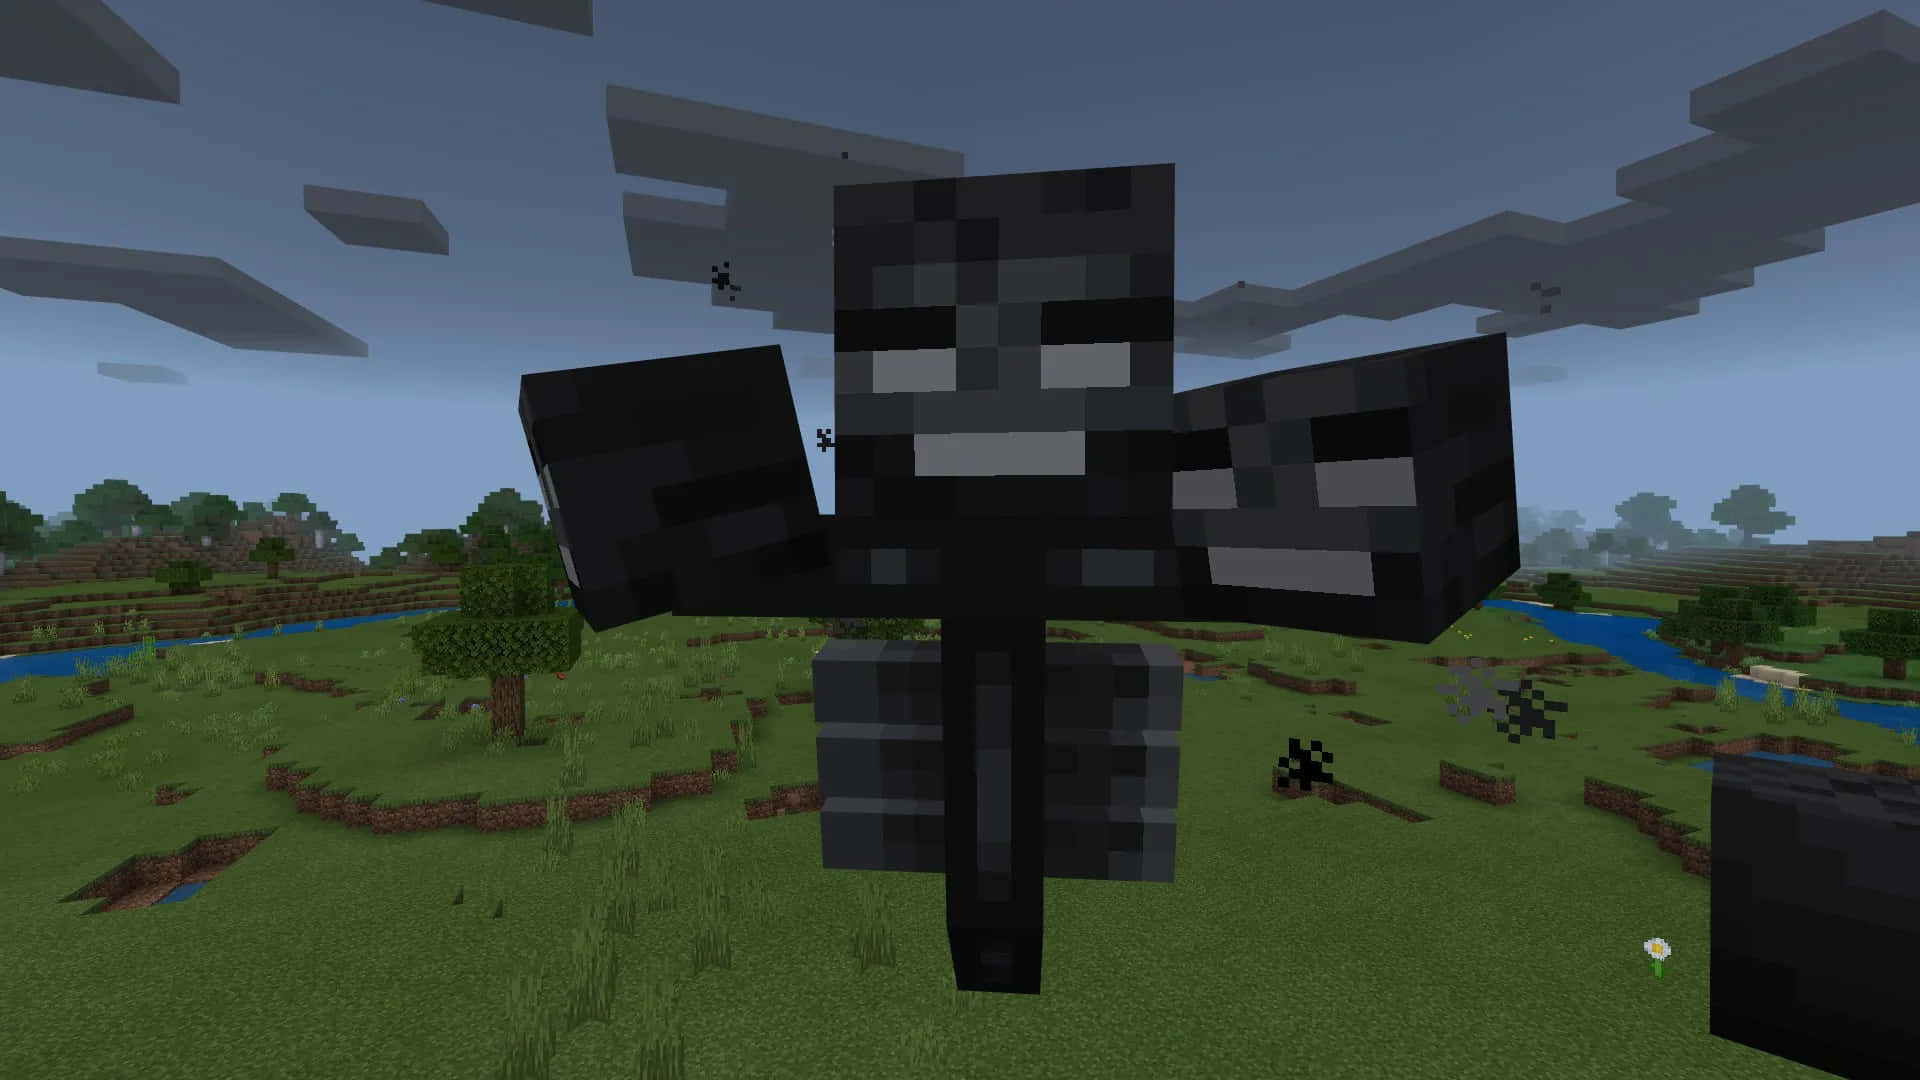 Epic Battle with the Wither Boss in Minecraft Wallpaper